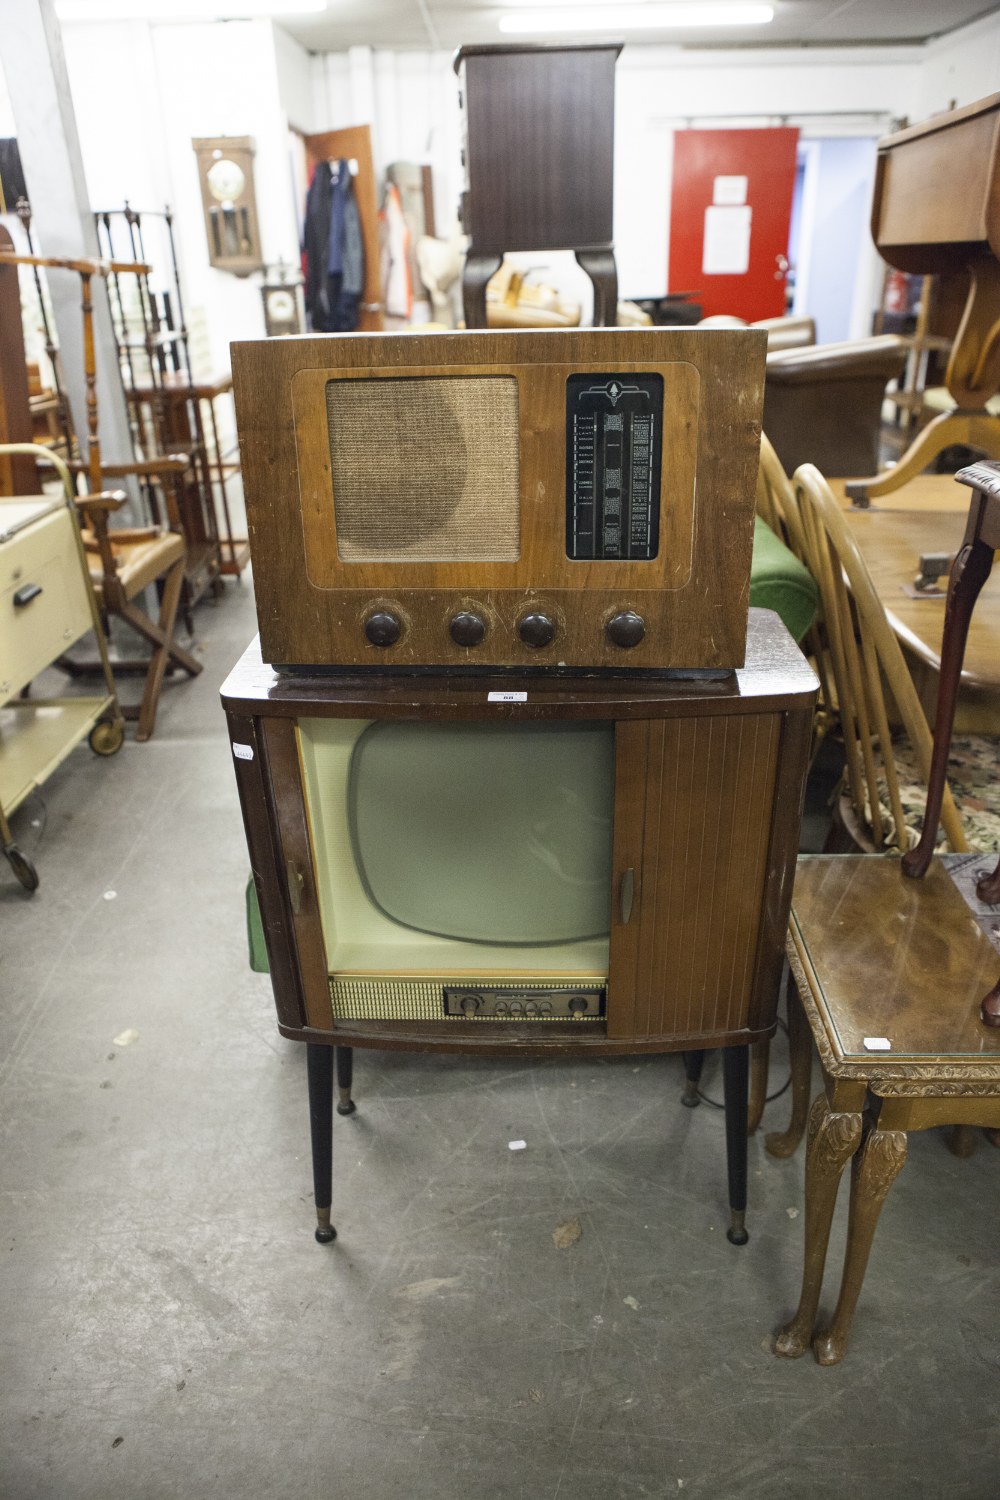 CIRCA 1960's TELEVISION SET, A WALNUTWOOD CASE WITH TAMBOUR SHUTTER AND AN OLD BUSH VALVE RADIO